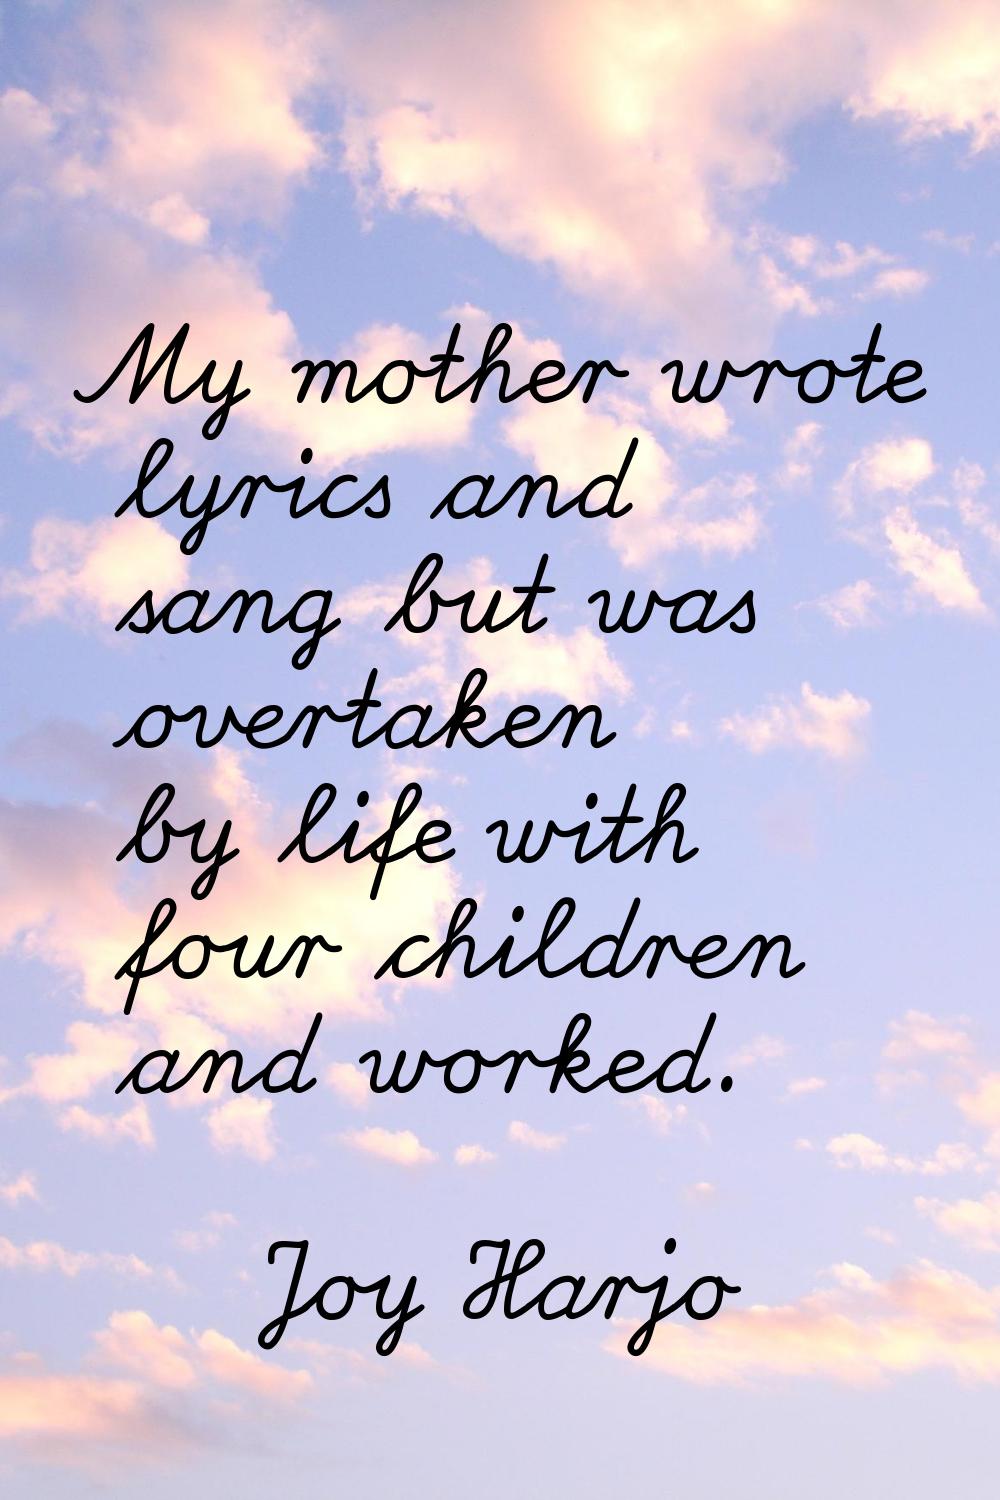 My mother wrote lyrics and sang but was overtaken by life with four children and worked.